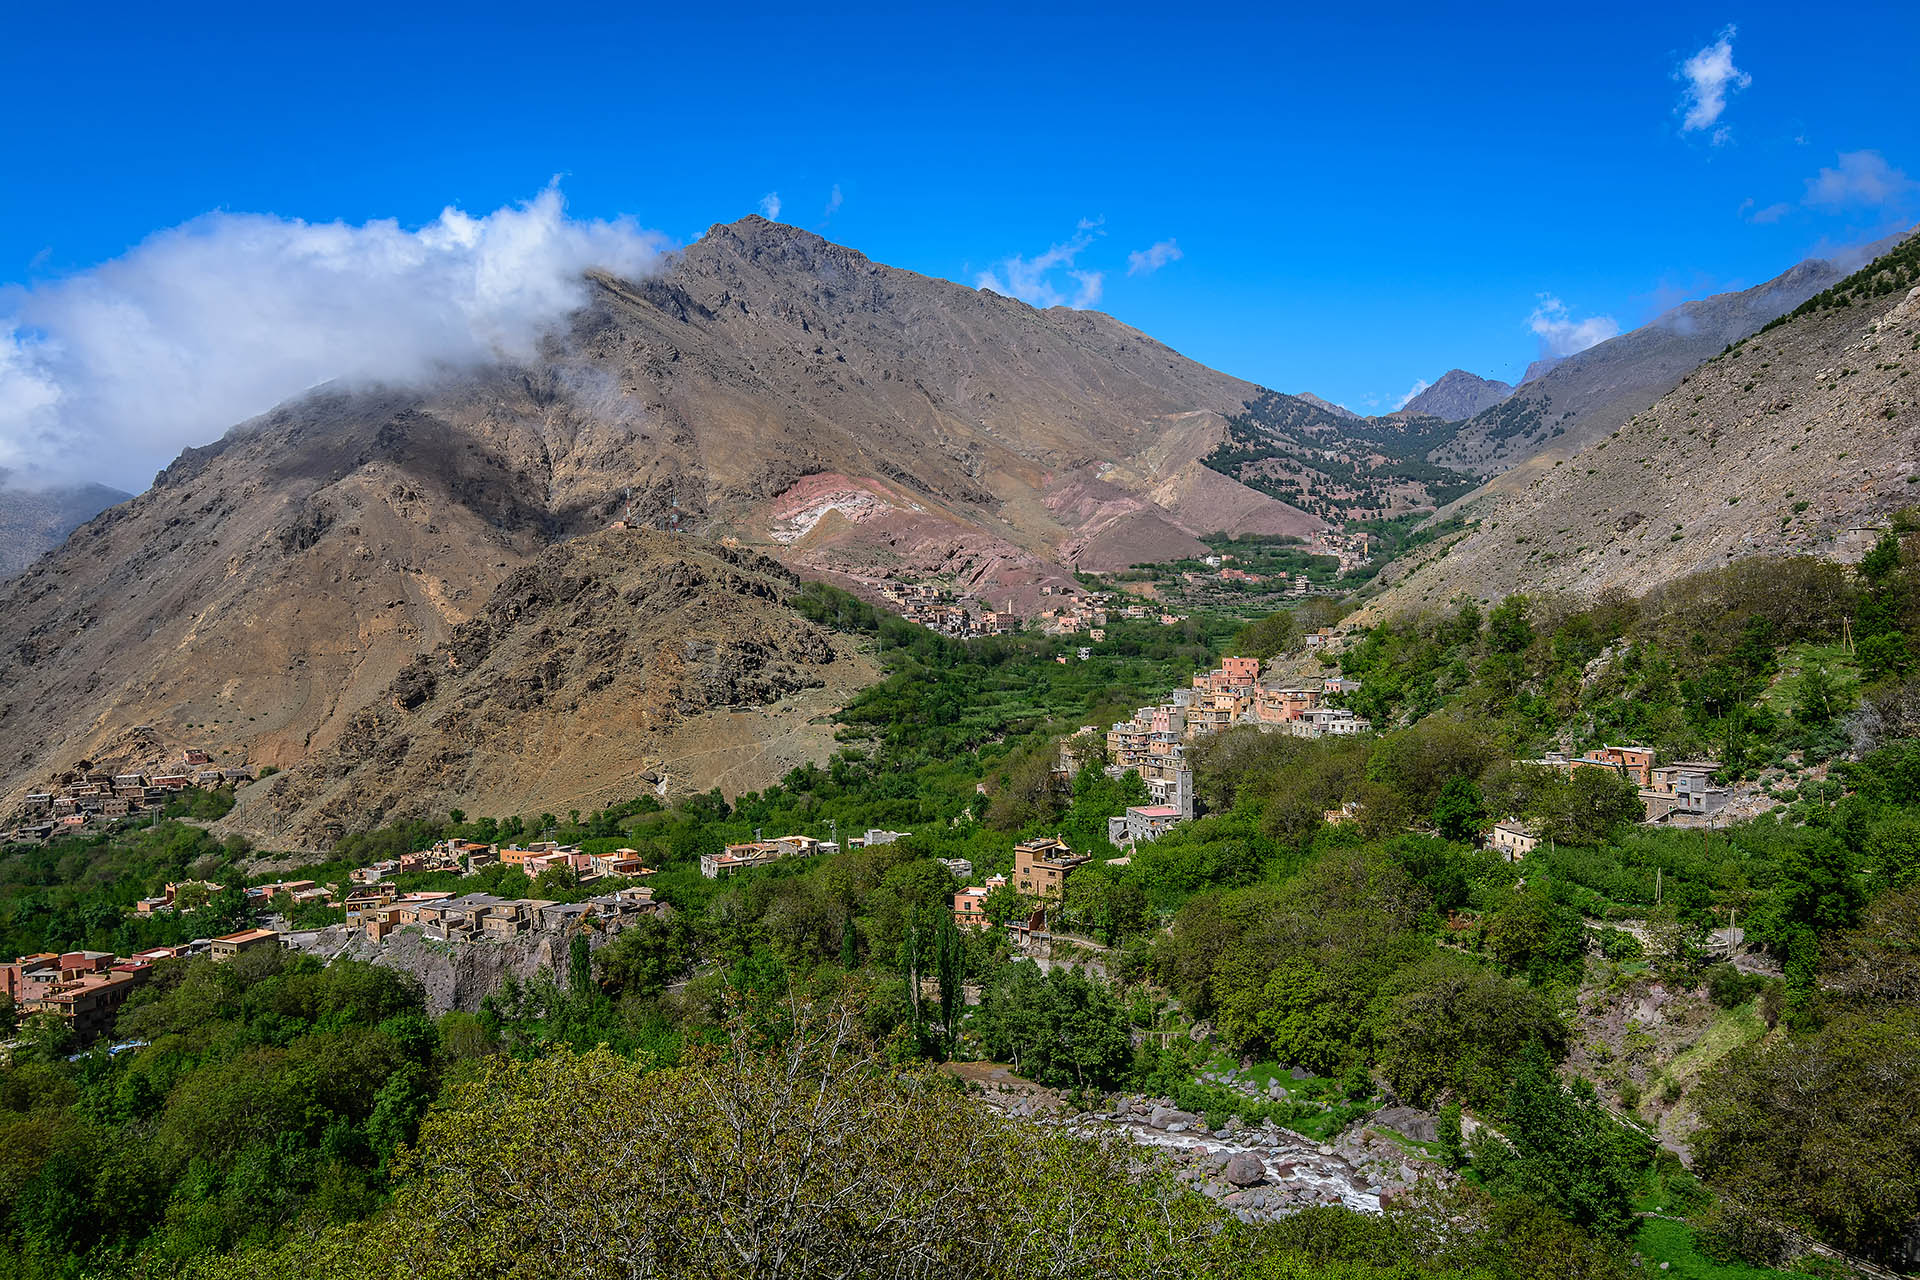 Morocco day trip from Marrakech to Ourika valley & Atlas Mountains